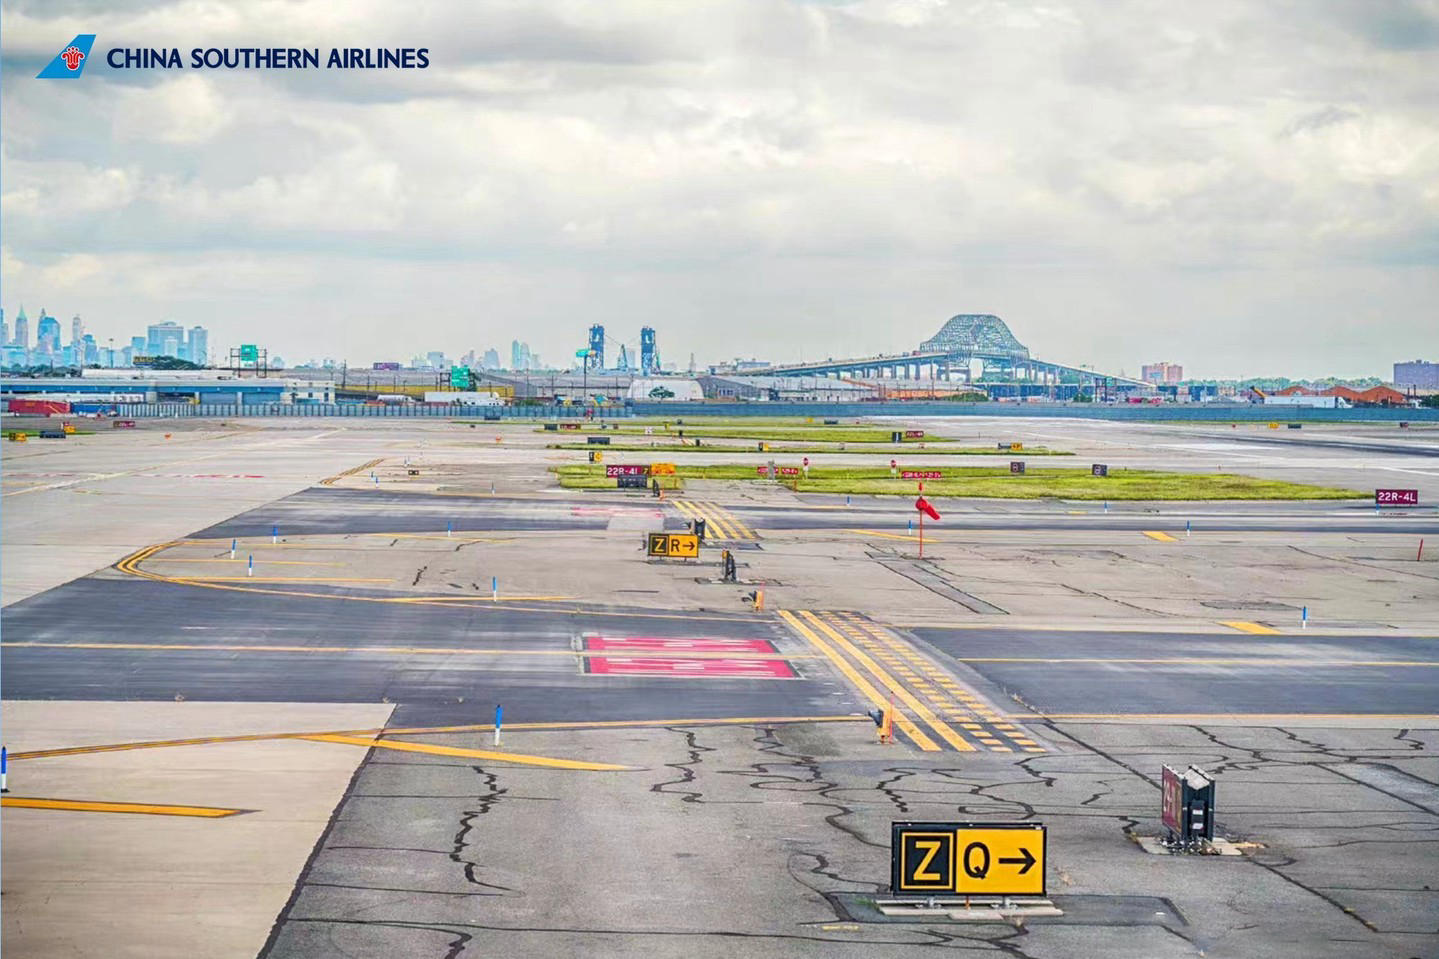 China Southern Airlines - Do you know what the letter and arrow signs on the airport runway mean